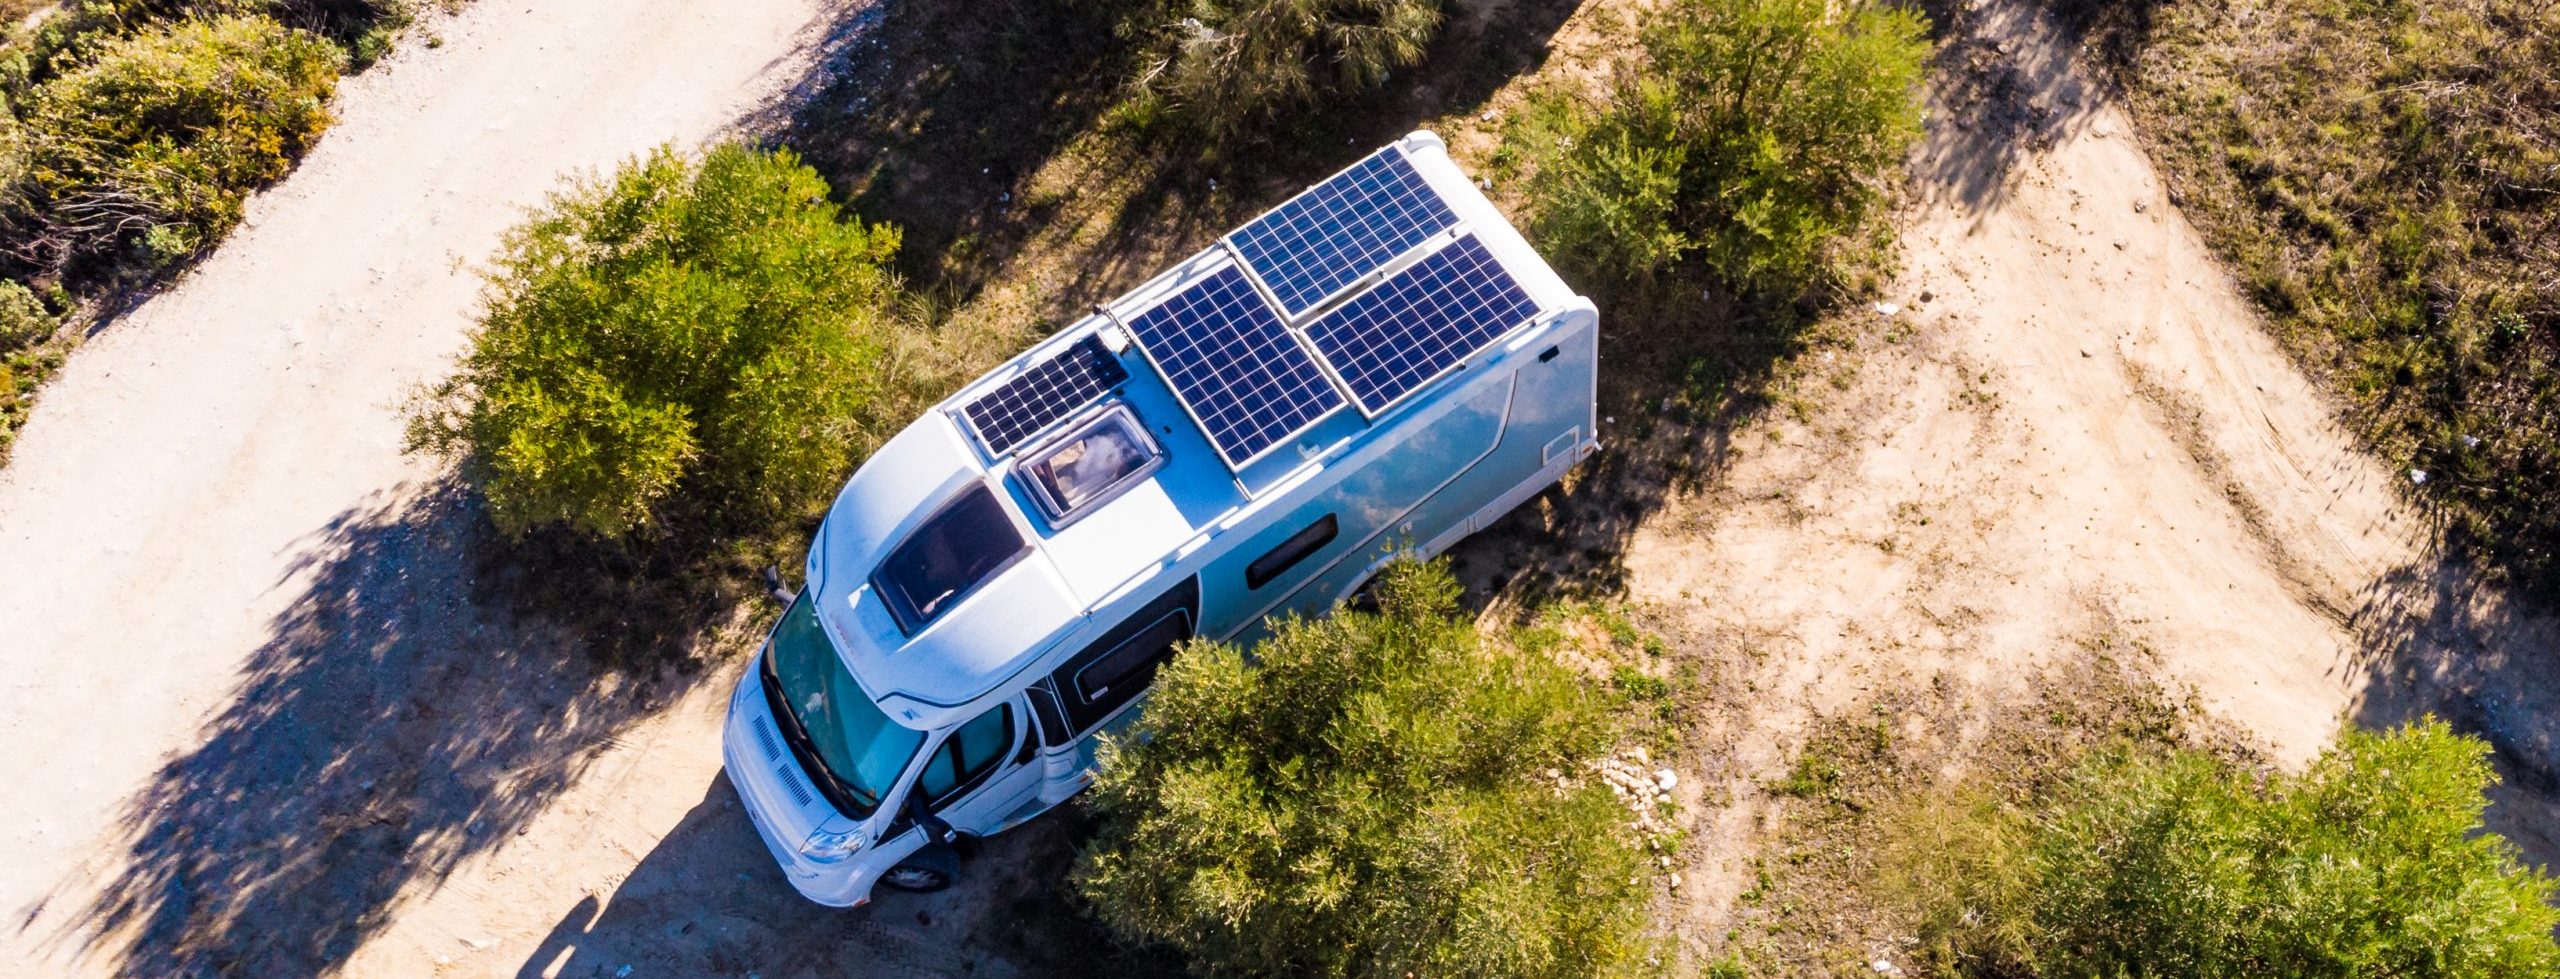 How to Make Your RV Green - Solar Panels